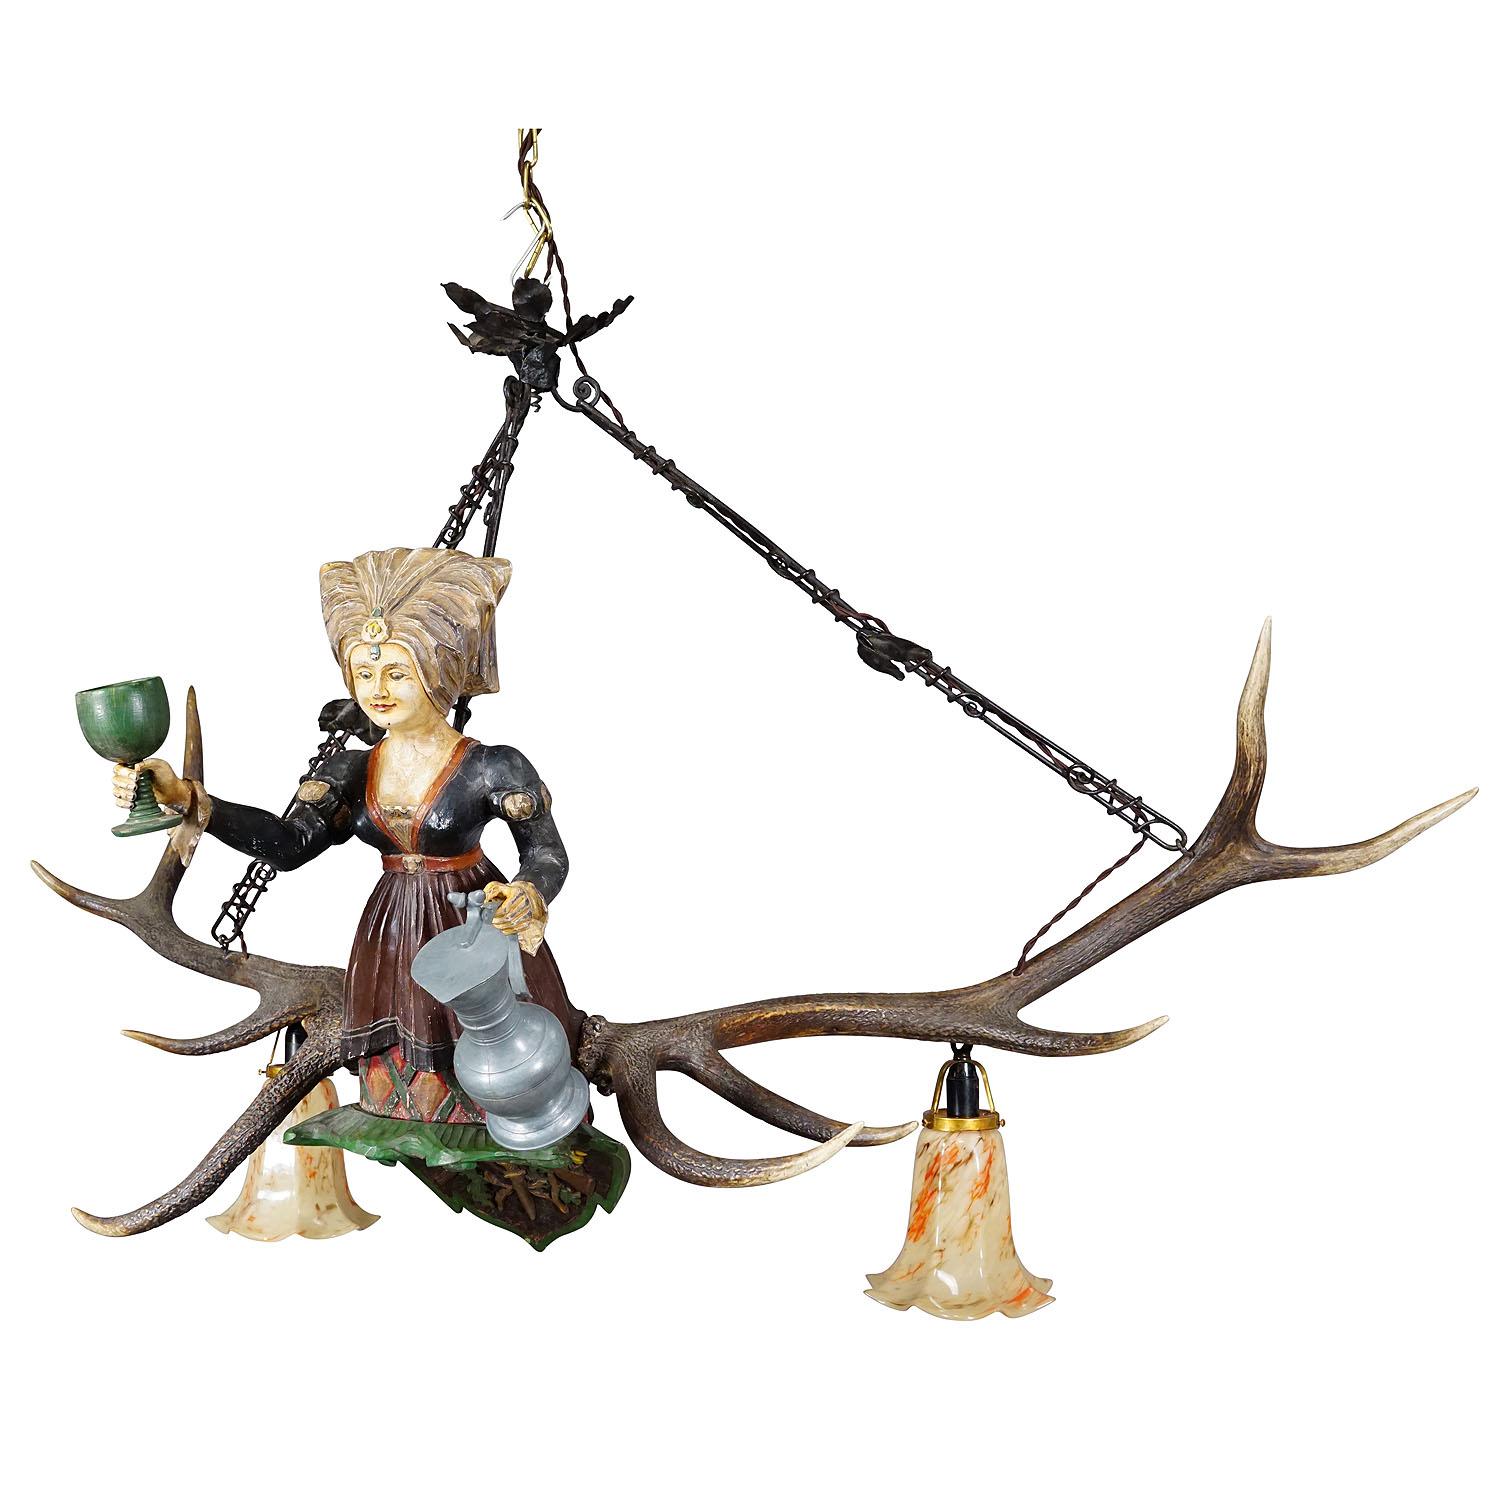 Antique Handcarved Lusterweibchen of a Wine Waitress ca. 1920

An antique lusterweibchen chandelier of a wine waitress lady holding a wine glass and a wine jug.  The luster is made of wood with handpainted finish and mounted on a large pair of deer